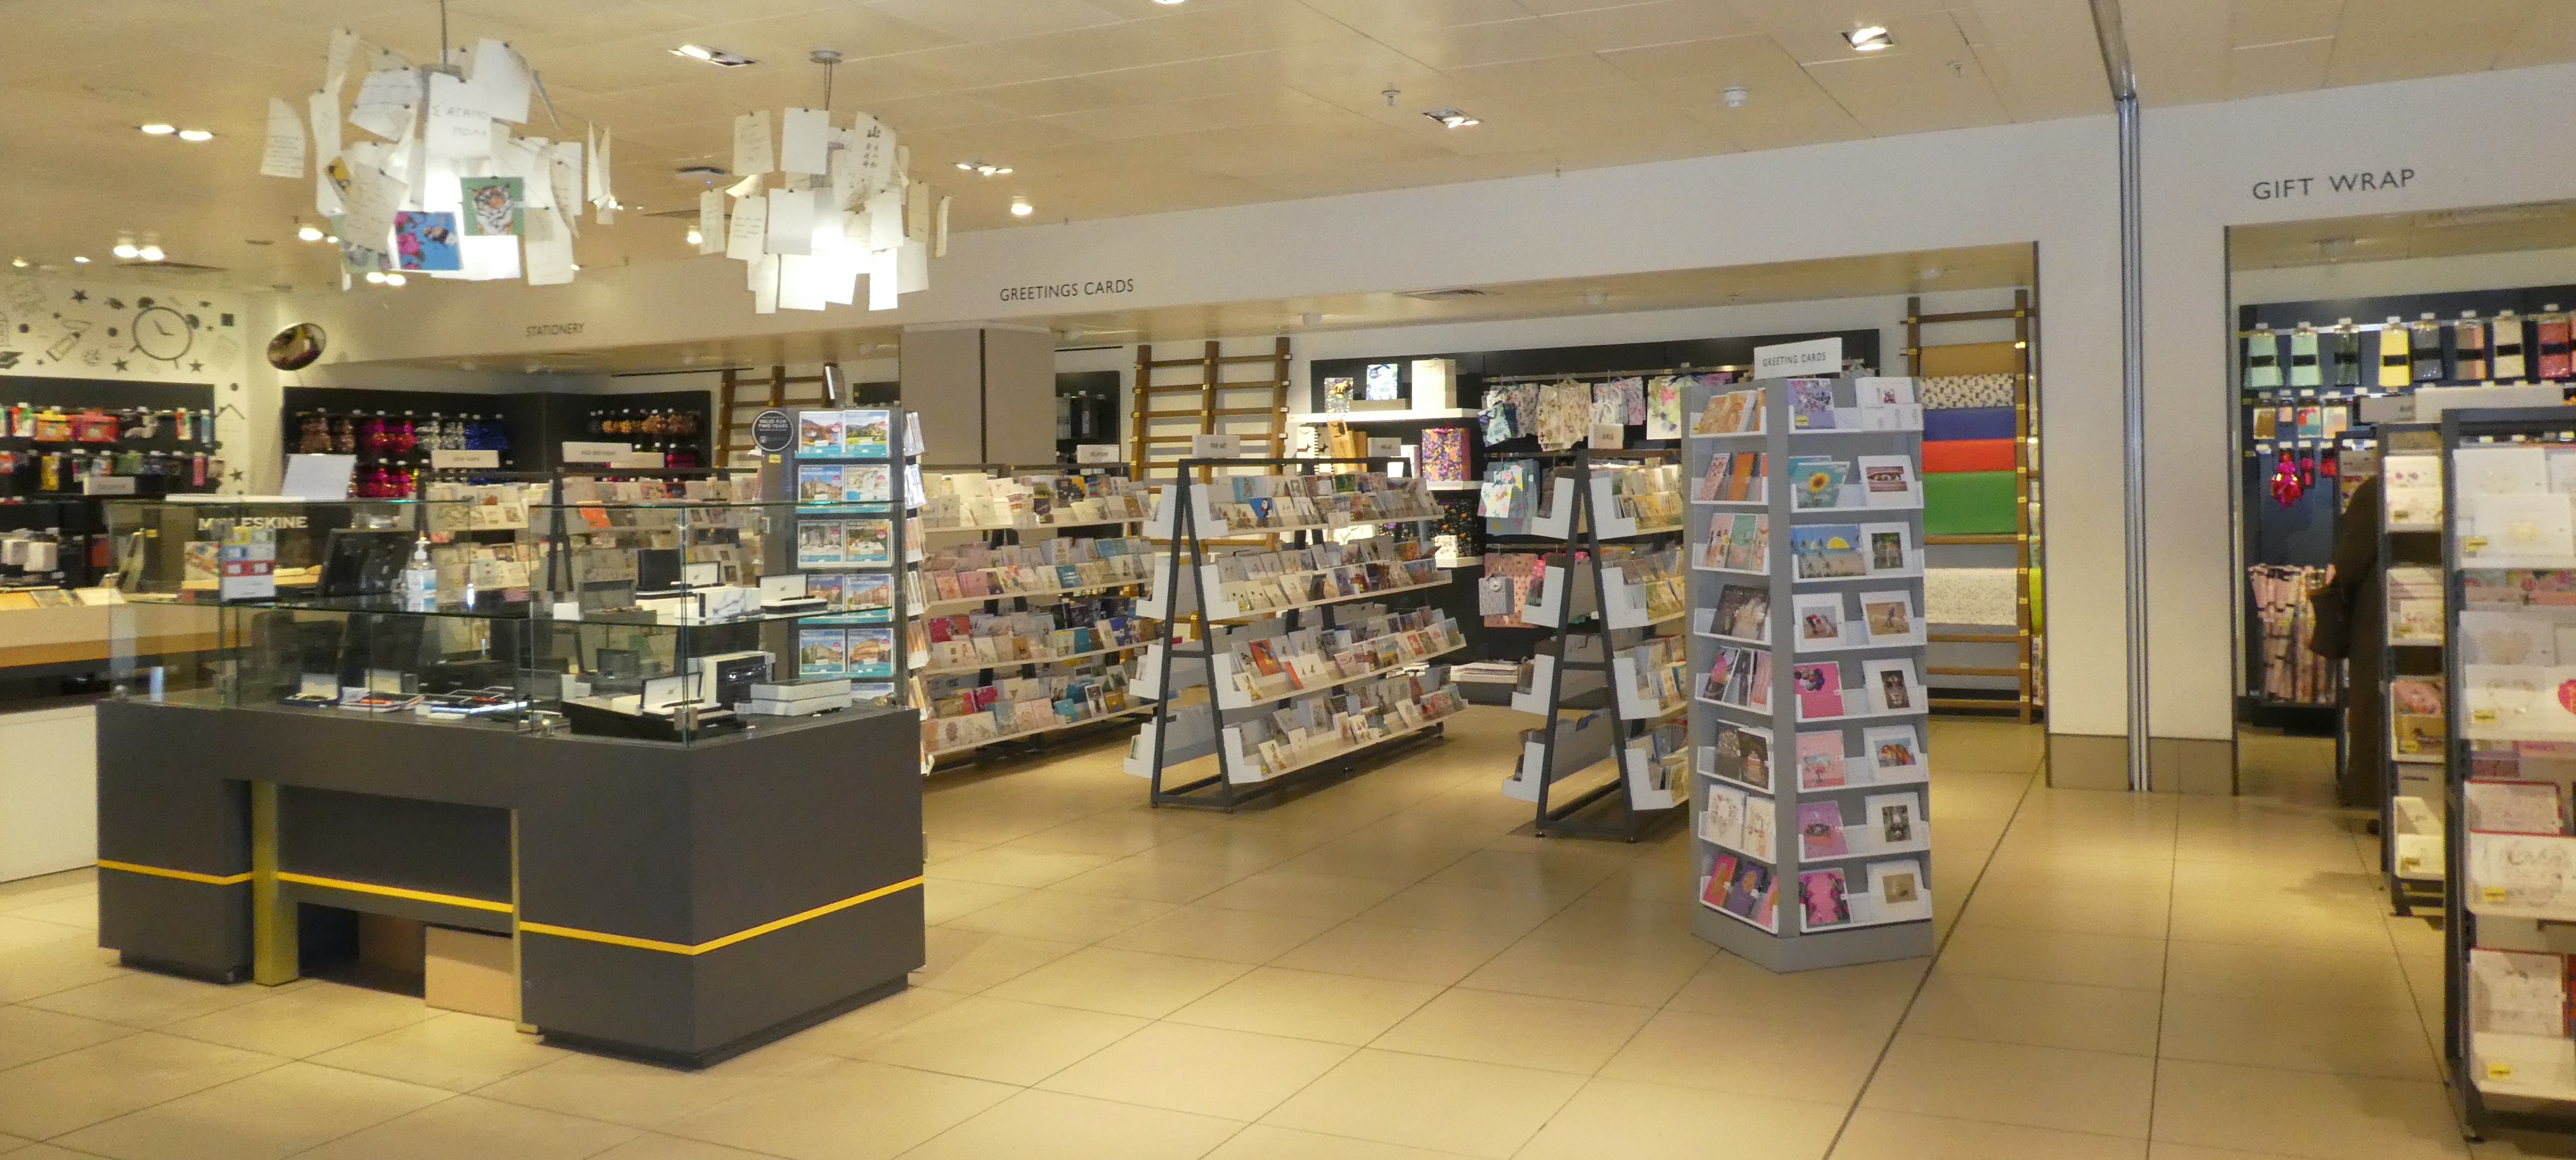 Above: Part of the greeting card department in John Lewis’ Oxford Street store